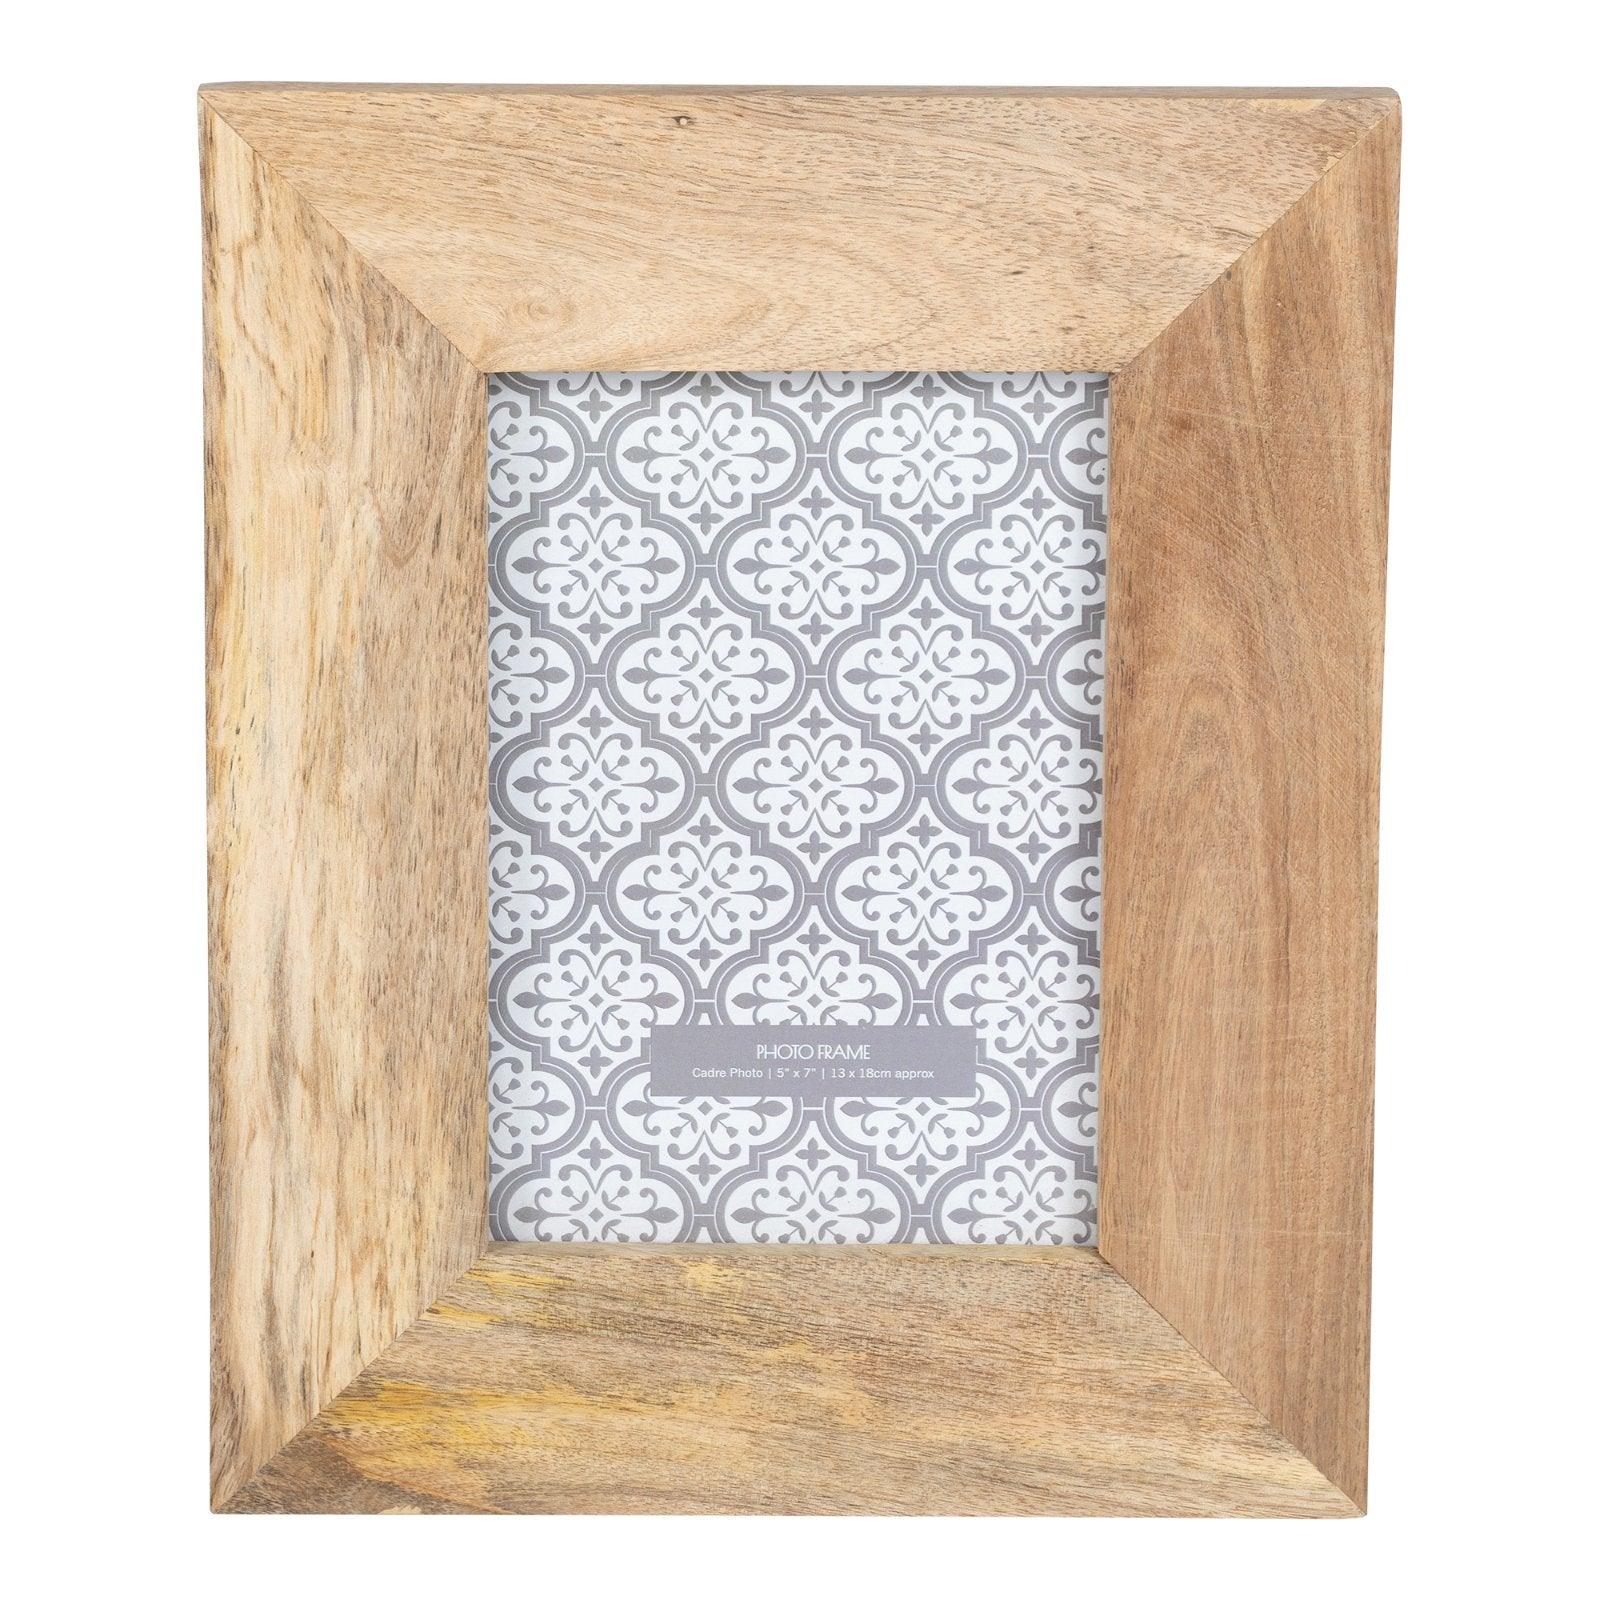 View Wooden Photo Frame 5x7 information